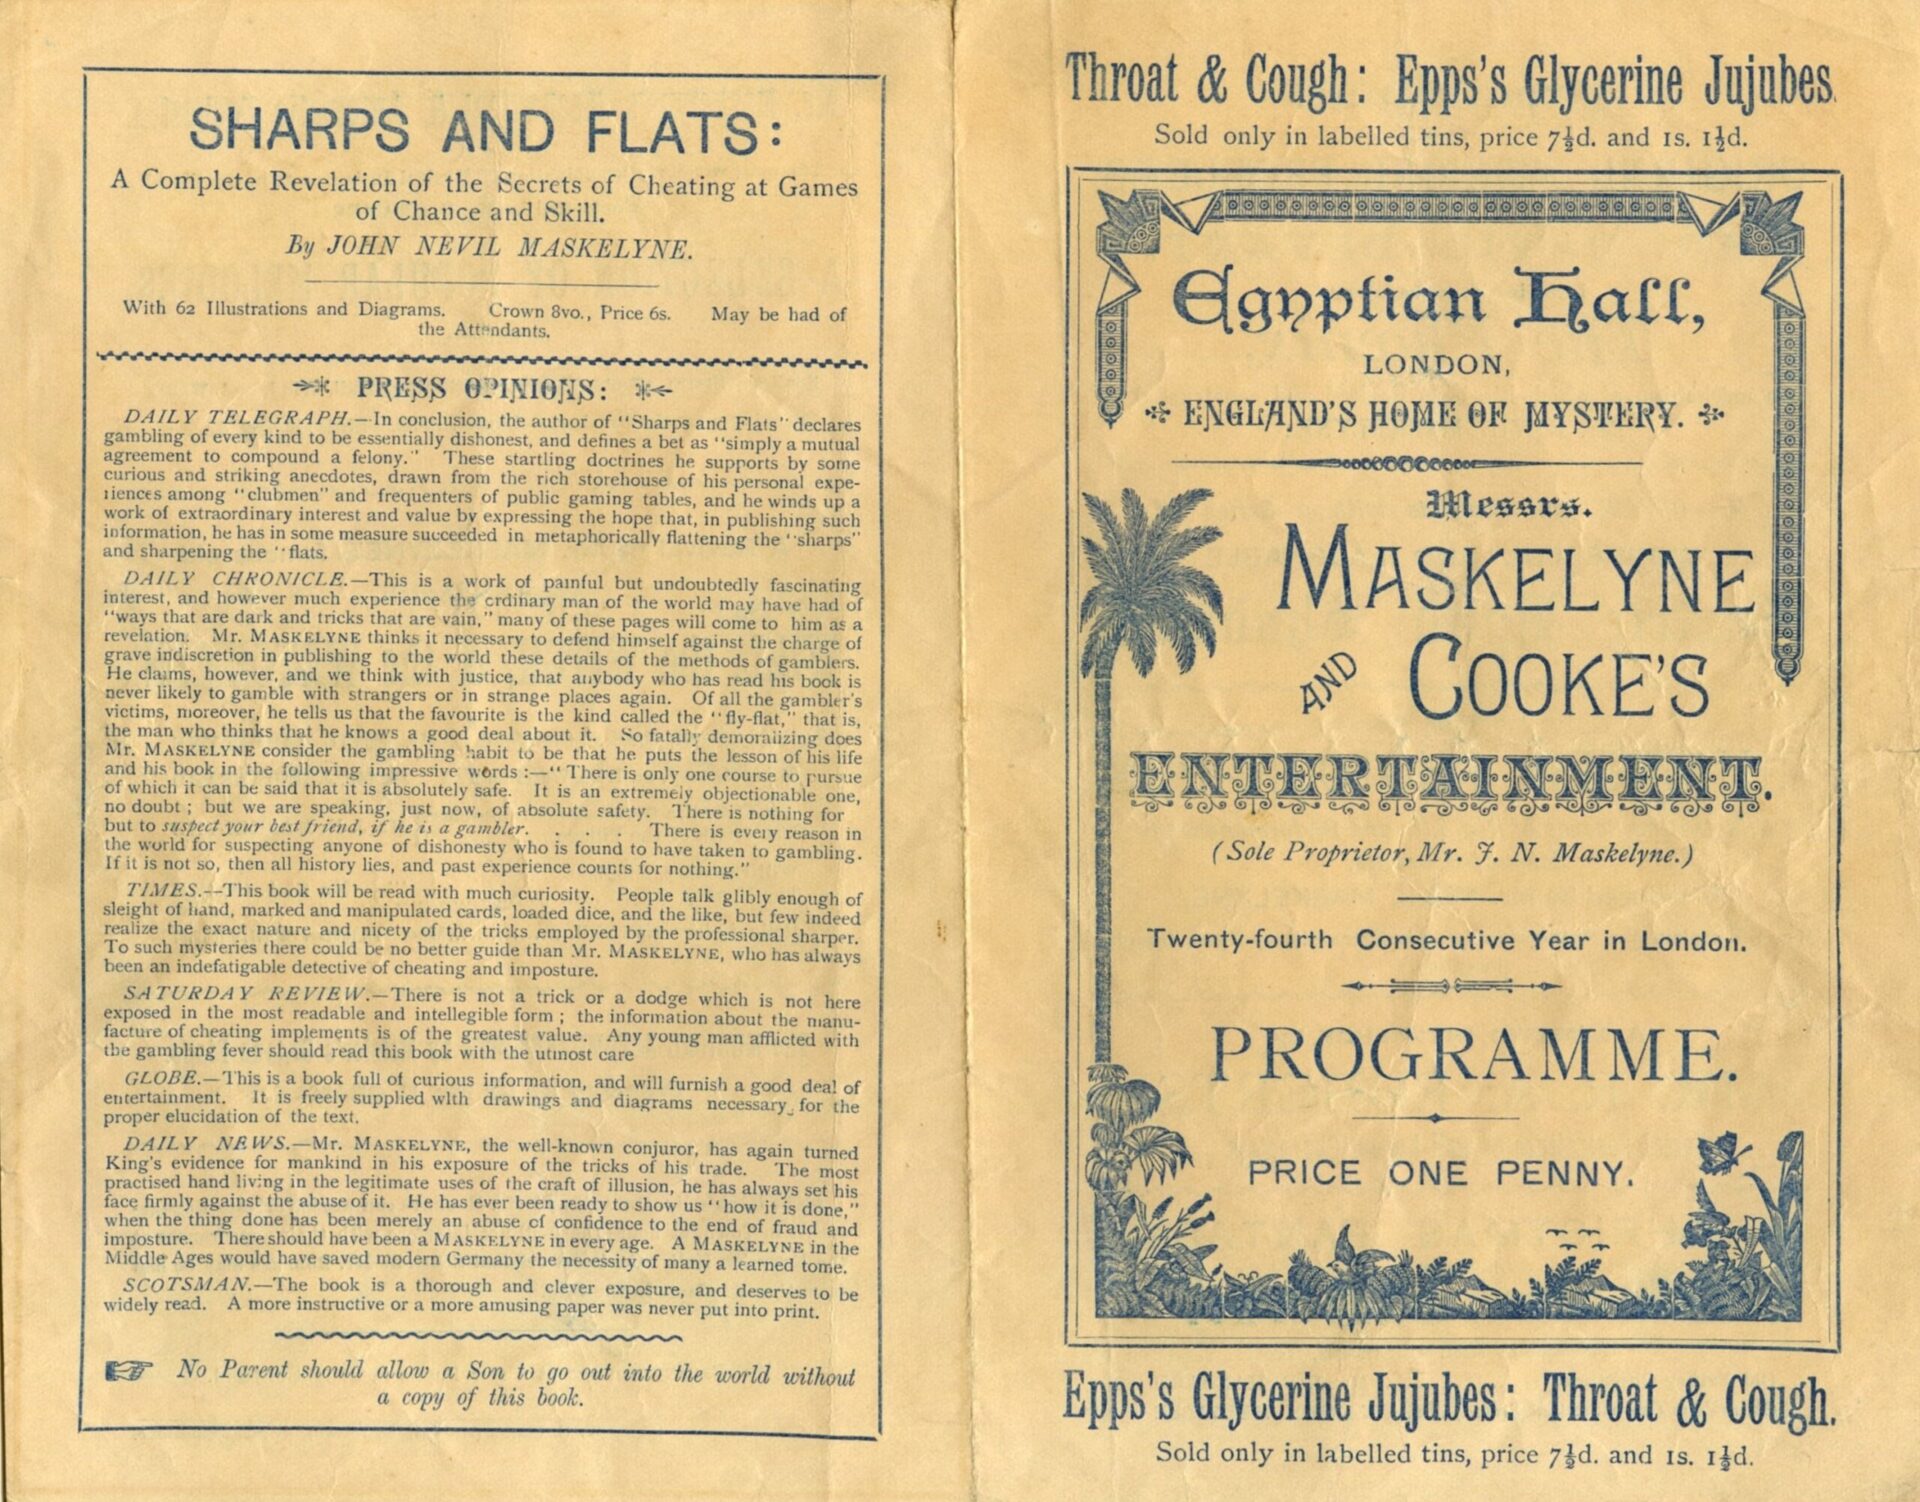 Maskelyne and Cooke programme for the Egyptian Hall, 24th consecutive year